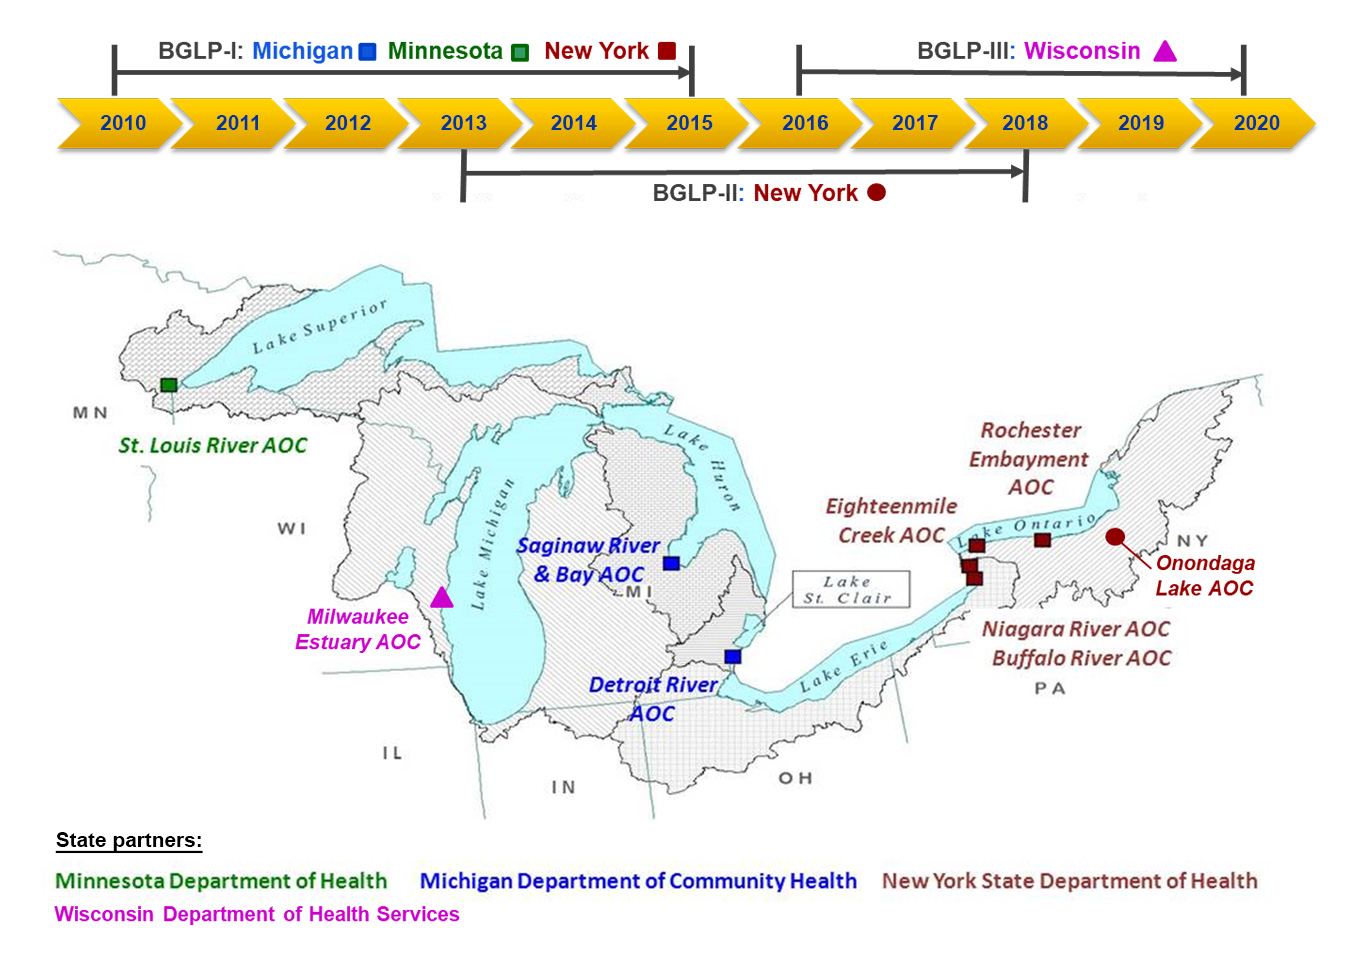 Map showing locations of BGLP sites in the Great Lakes region from 2010 to 2020 in New York State (Rochester Embayment AOC, Eighteenmile Creek AOC, Niagara River AOC, Buffalo River AOC, Onondaga Lake AOC), Minnesota (St. Louis River AOC), Michigan (Saginaw River & Bay AOC, Detroit River AOC), and Wisconsin (Milwaukee Estuary AOC).